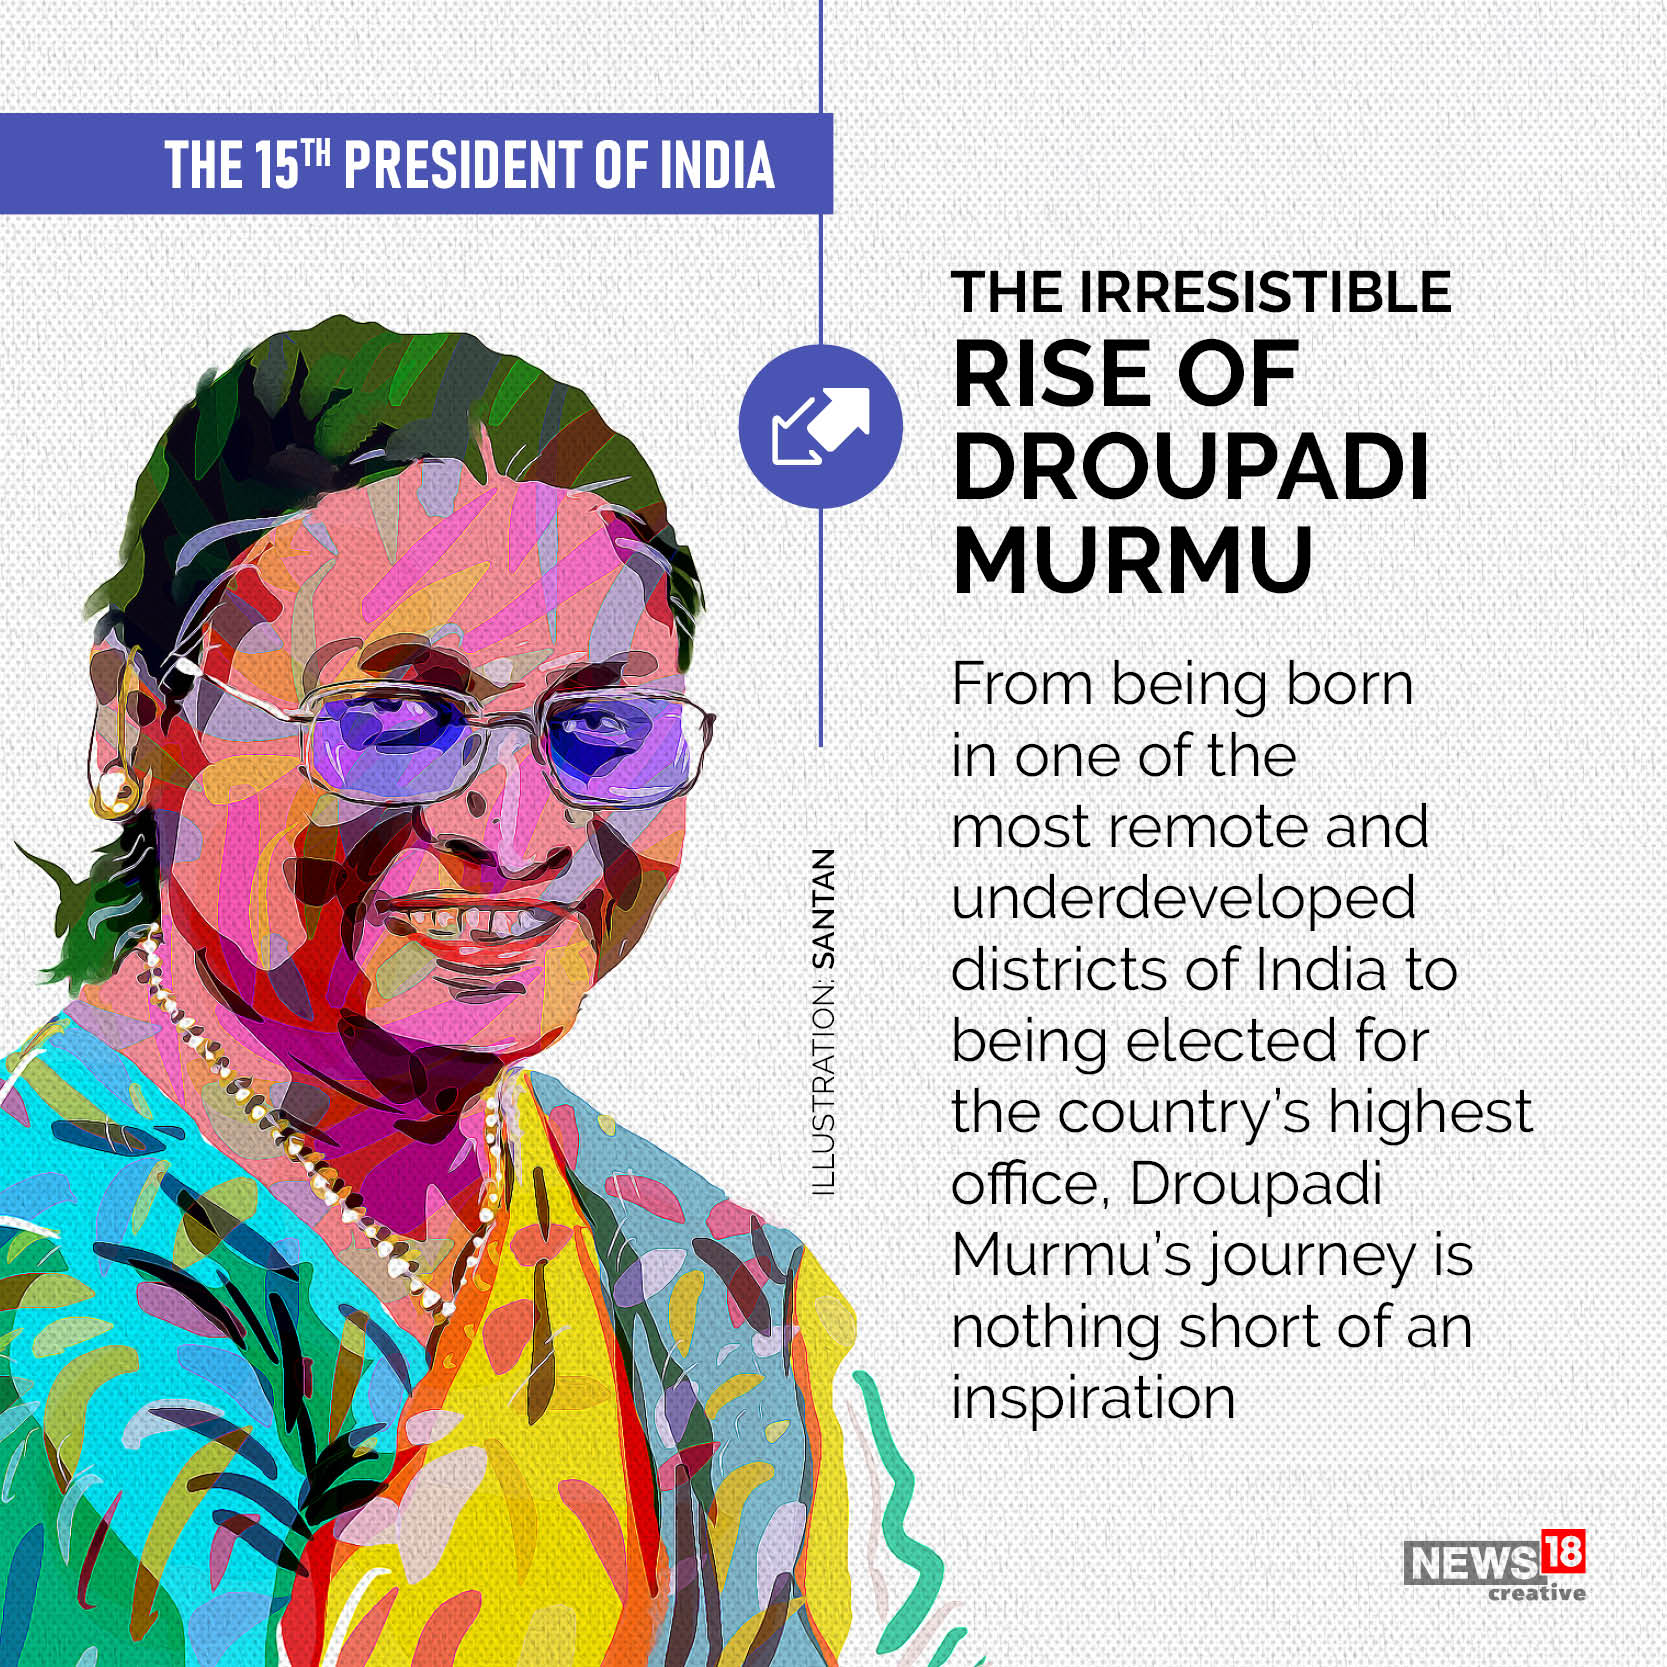 Droupadi Murmu: All you need to know about India's 15th President